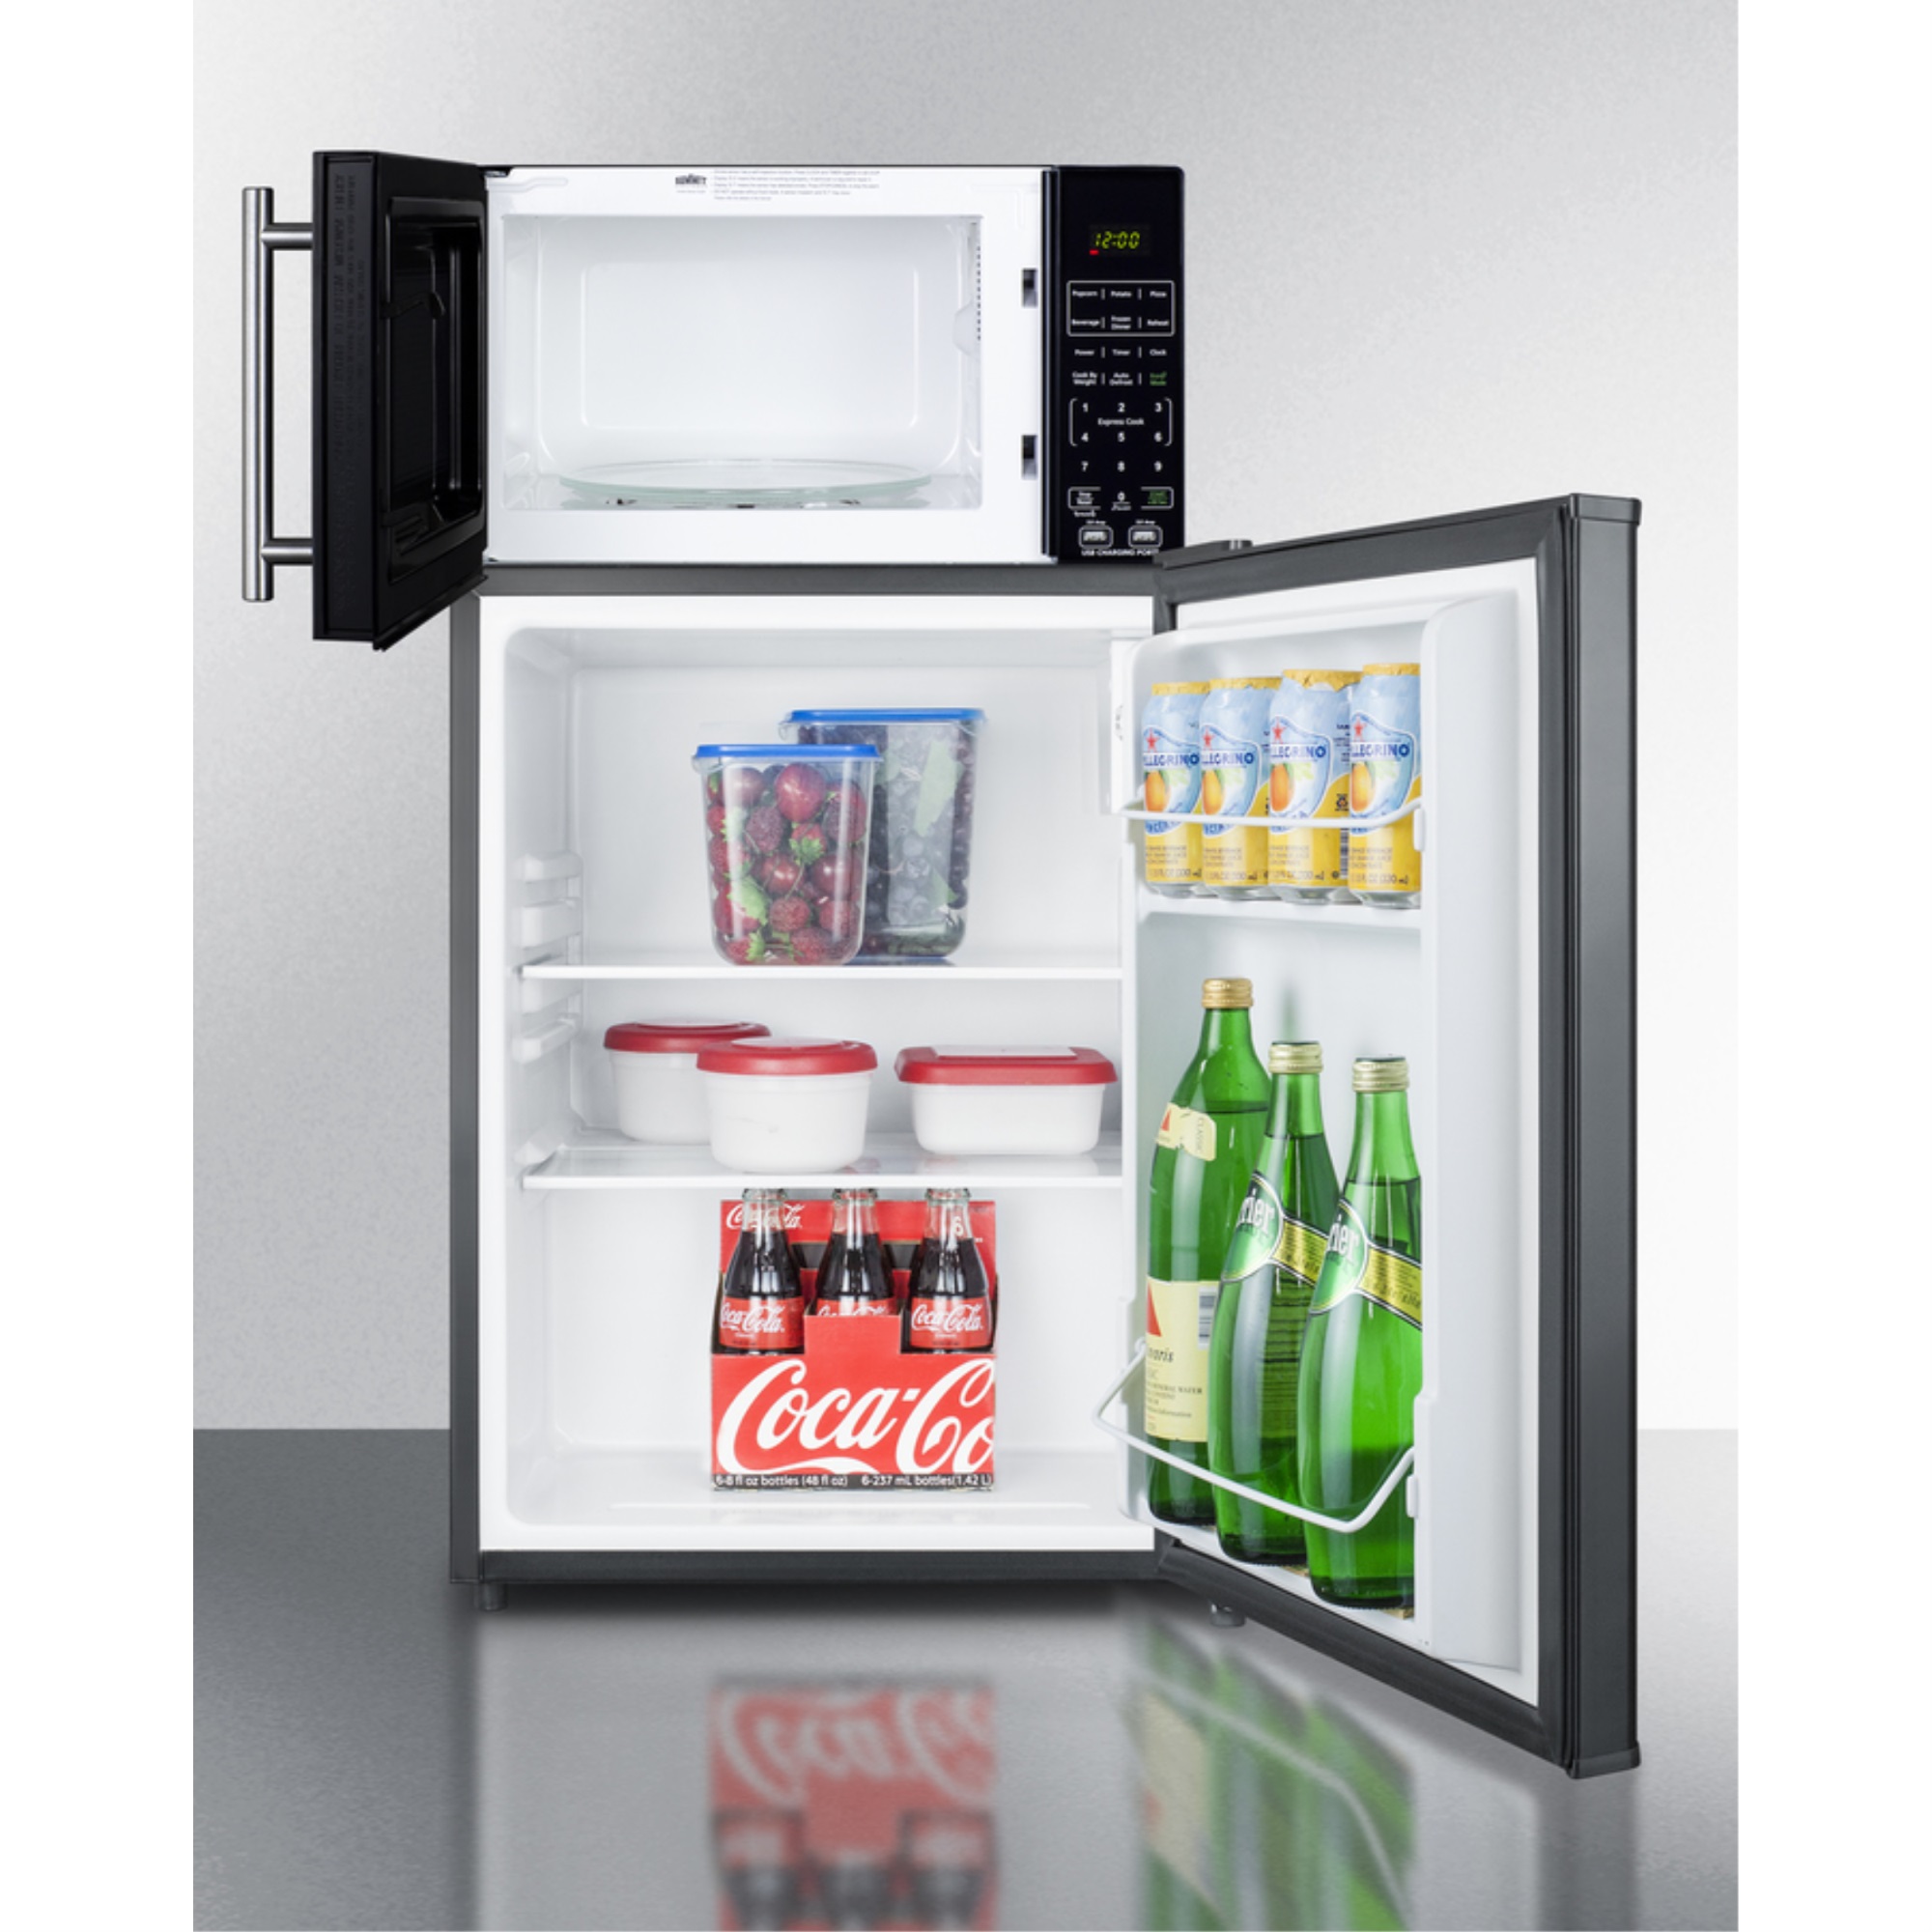 Summit Compact all-refrigerator in black and microwave with built-in allocator, with brackets included (ships in 3 boxes on one palle